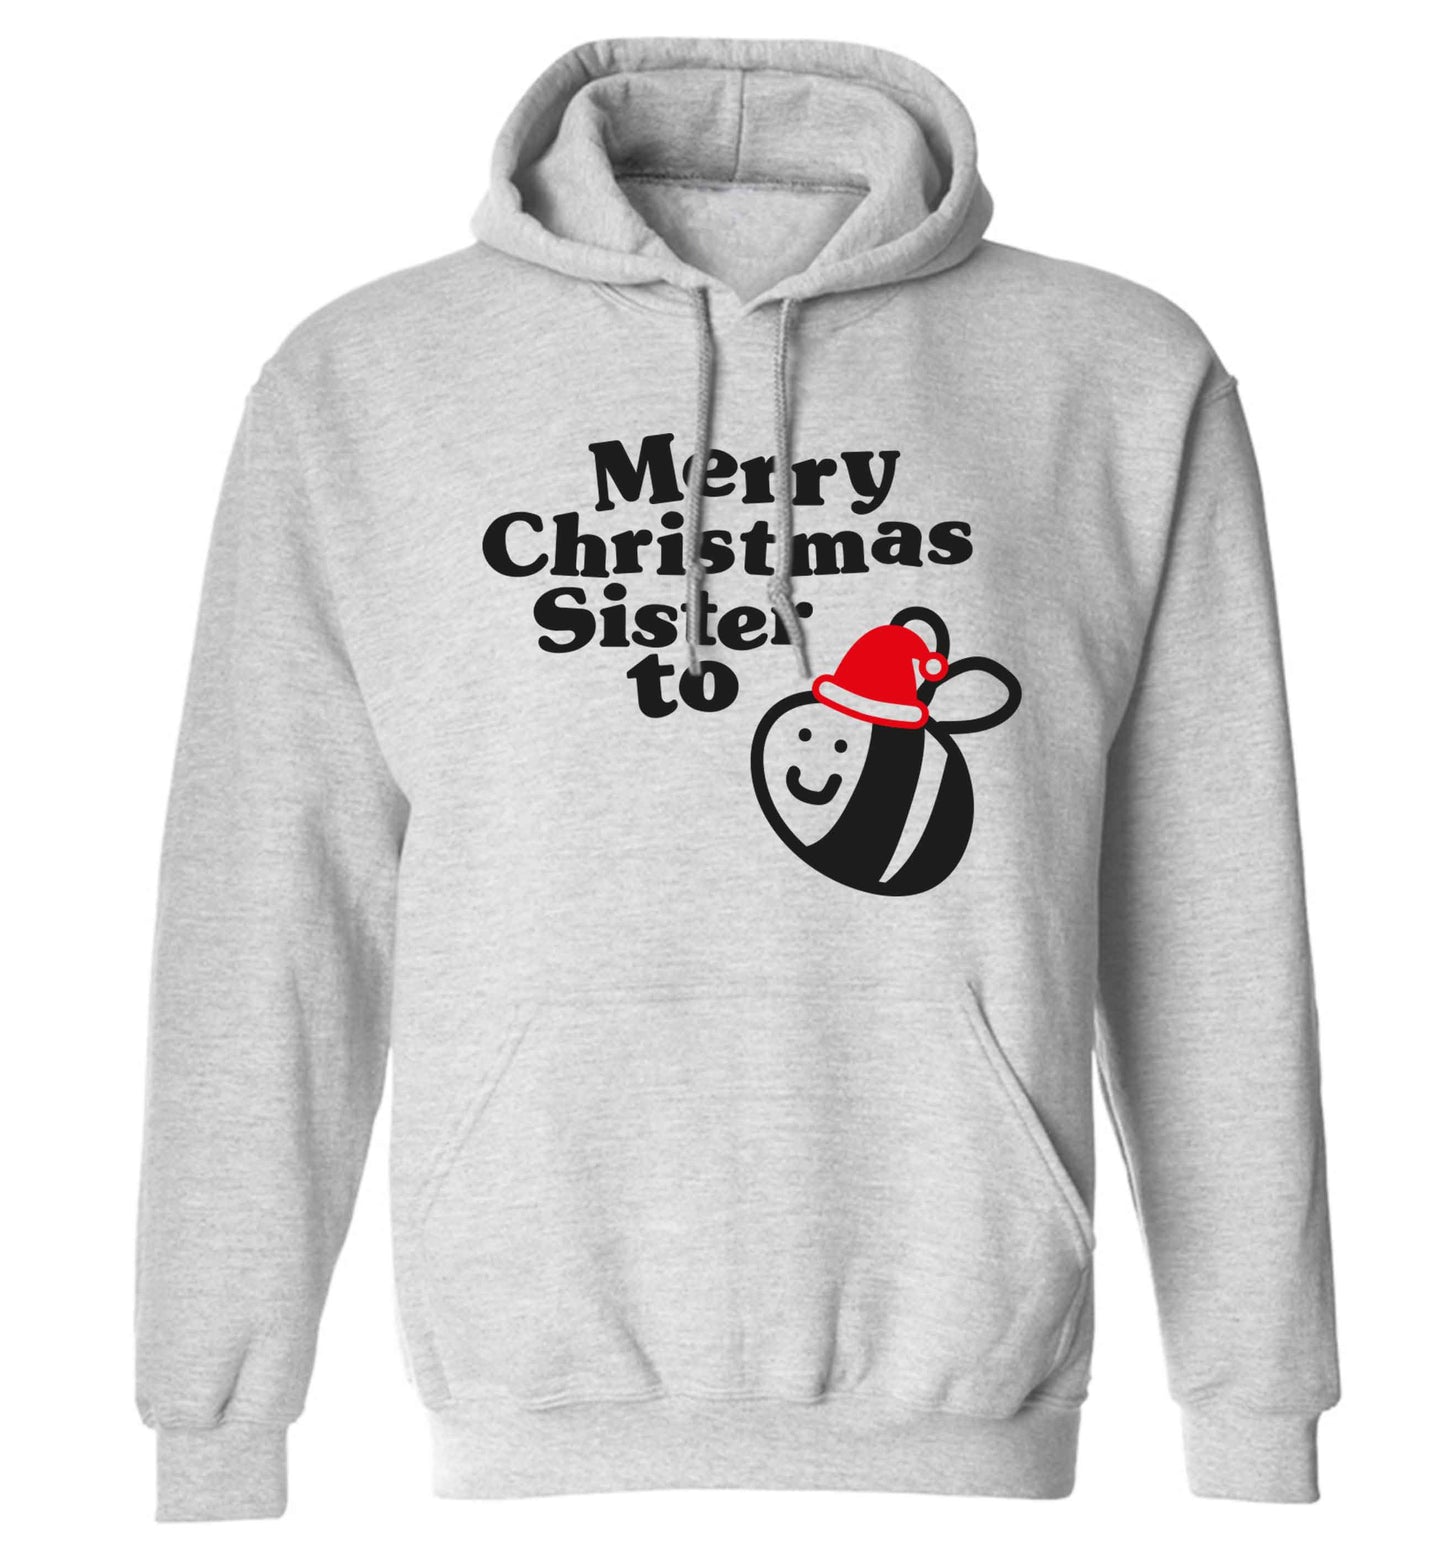 Merry Christmas sister to be adults unisex grey hoodie 2XL